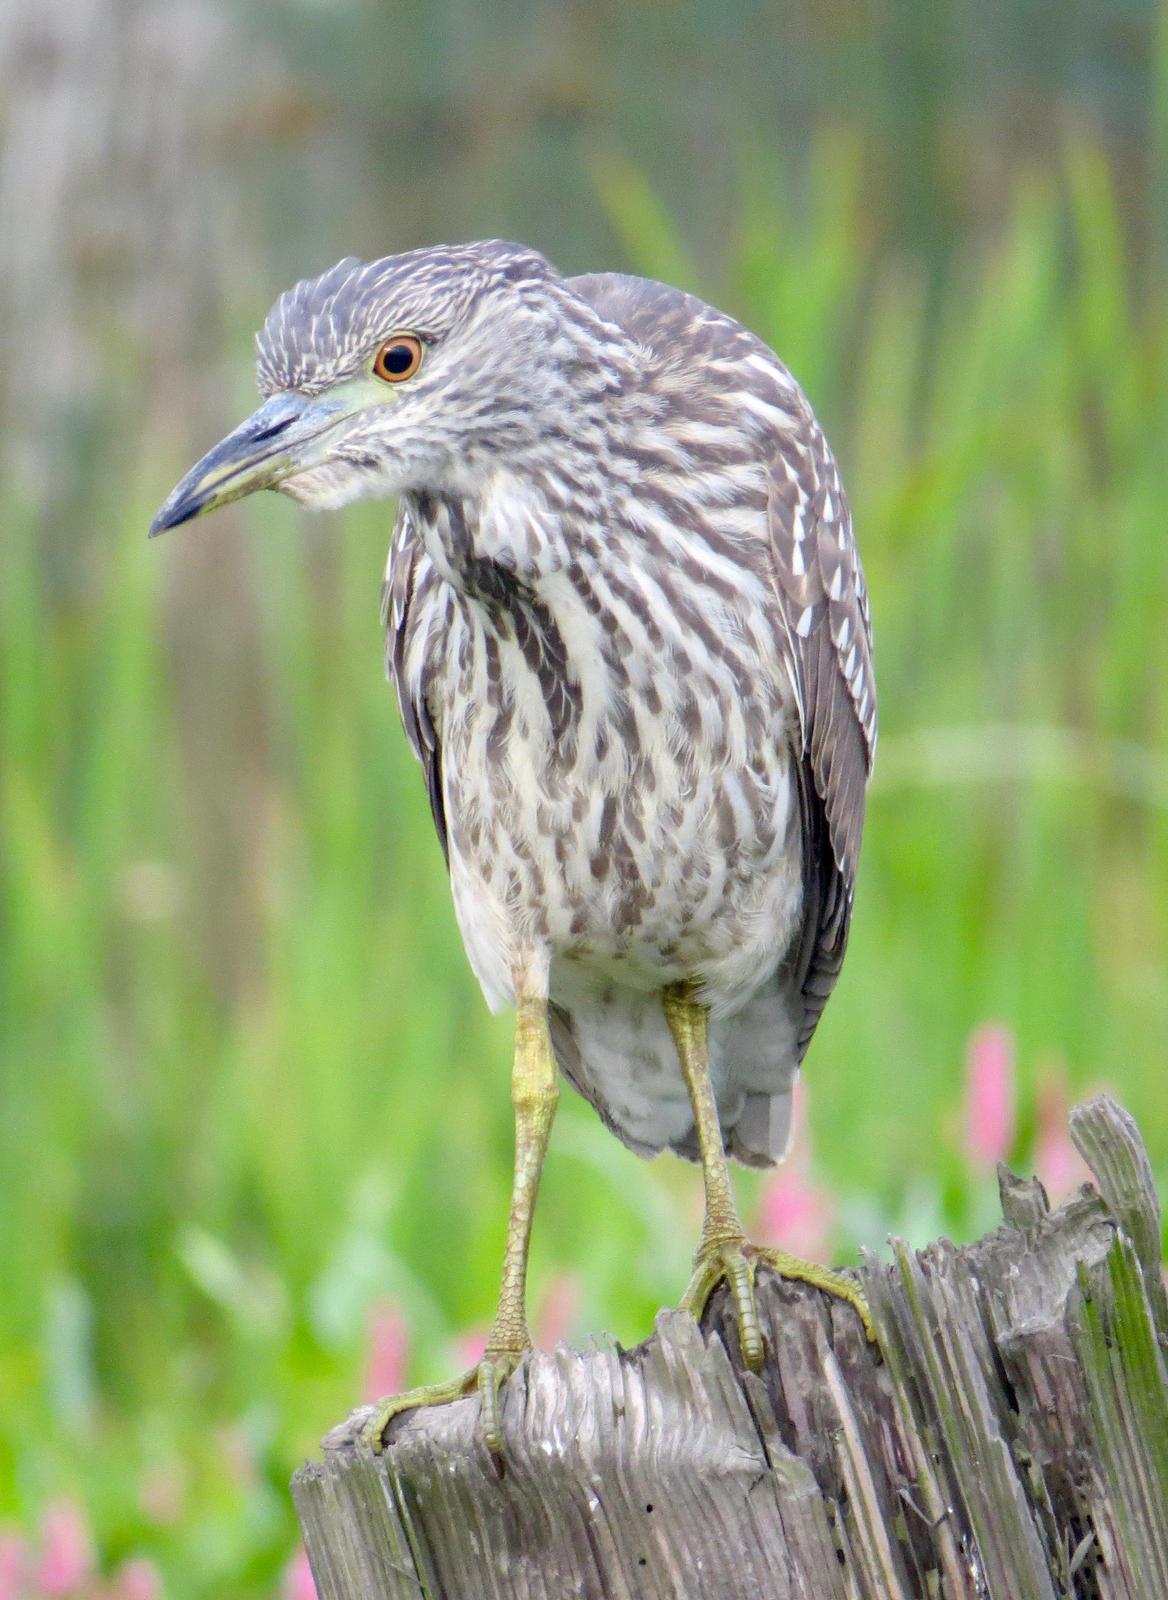 Black-crowned Night-Heron (American) Photo by Don Glasco